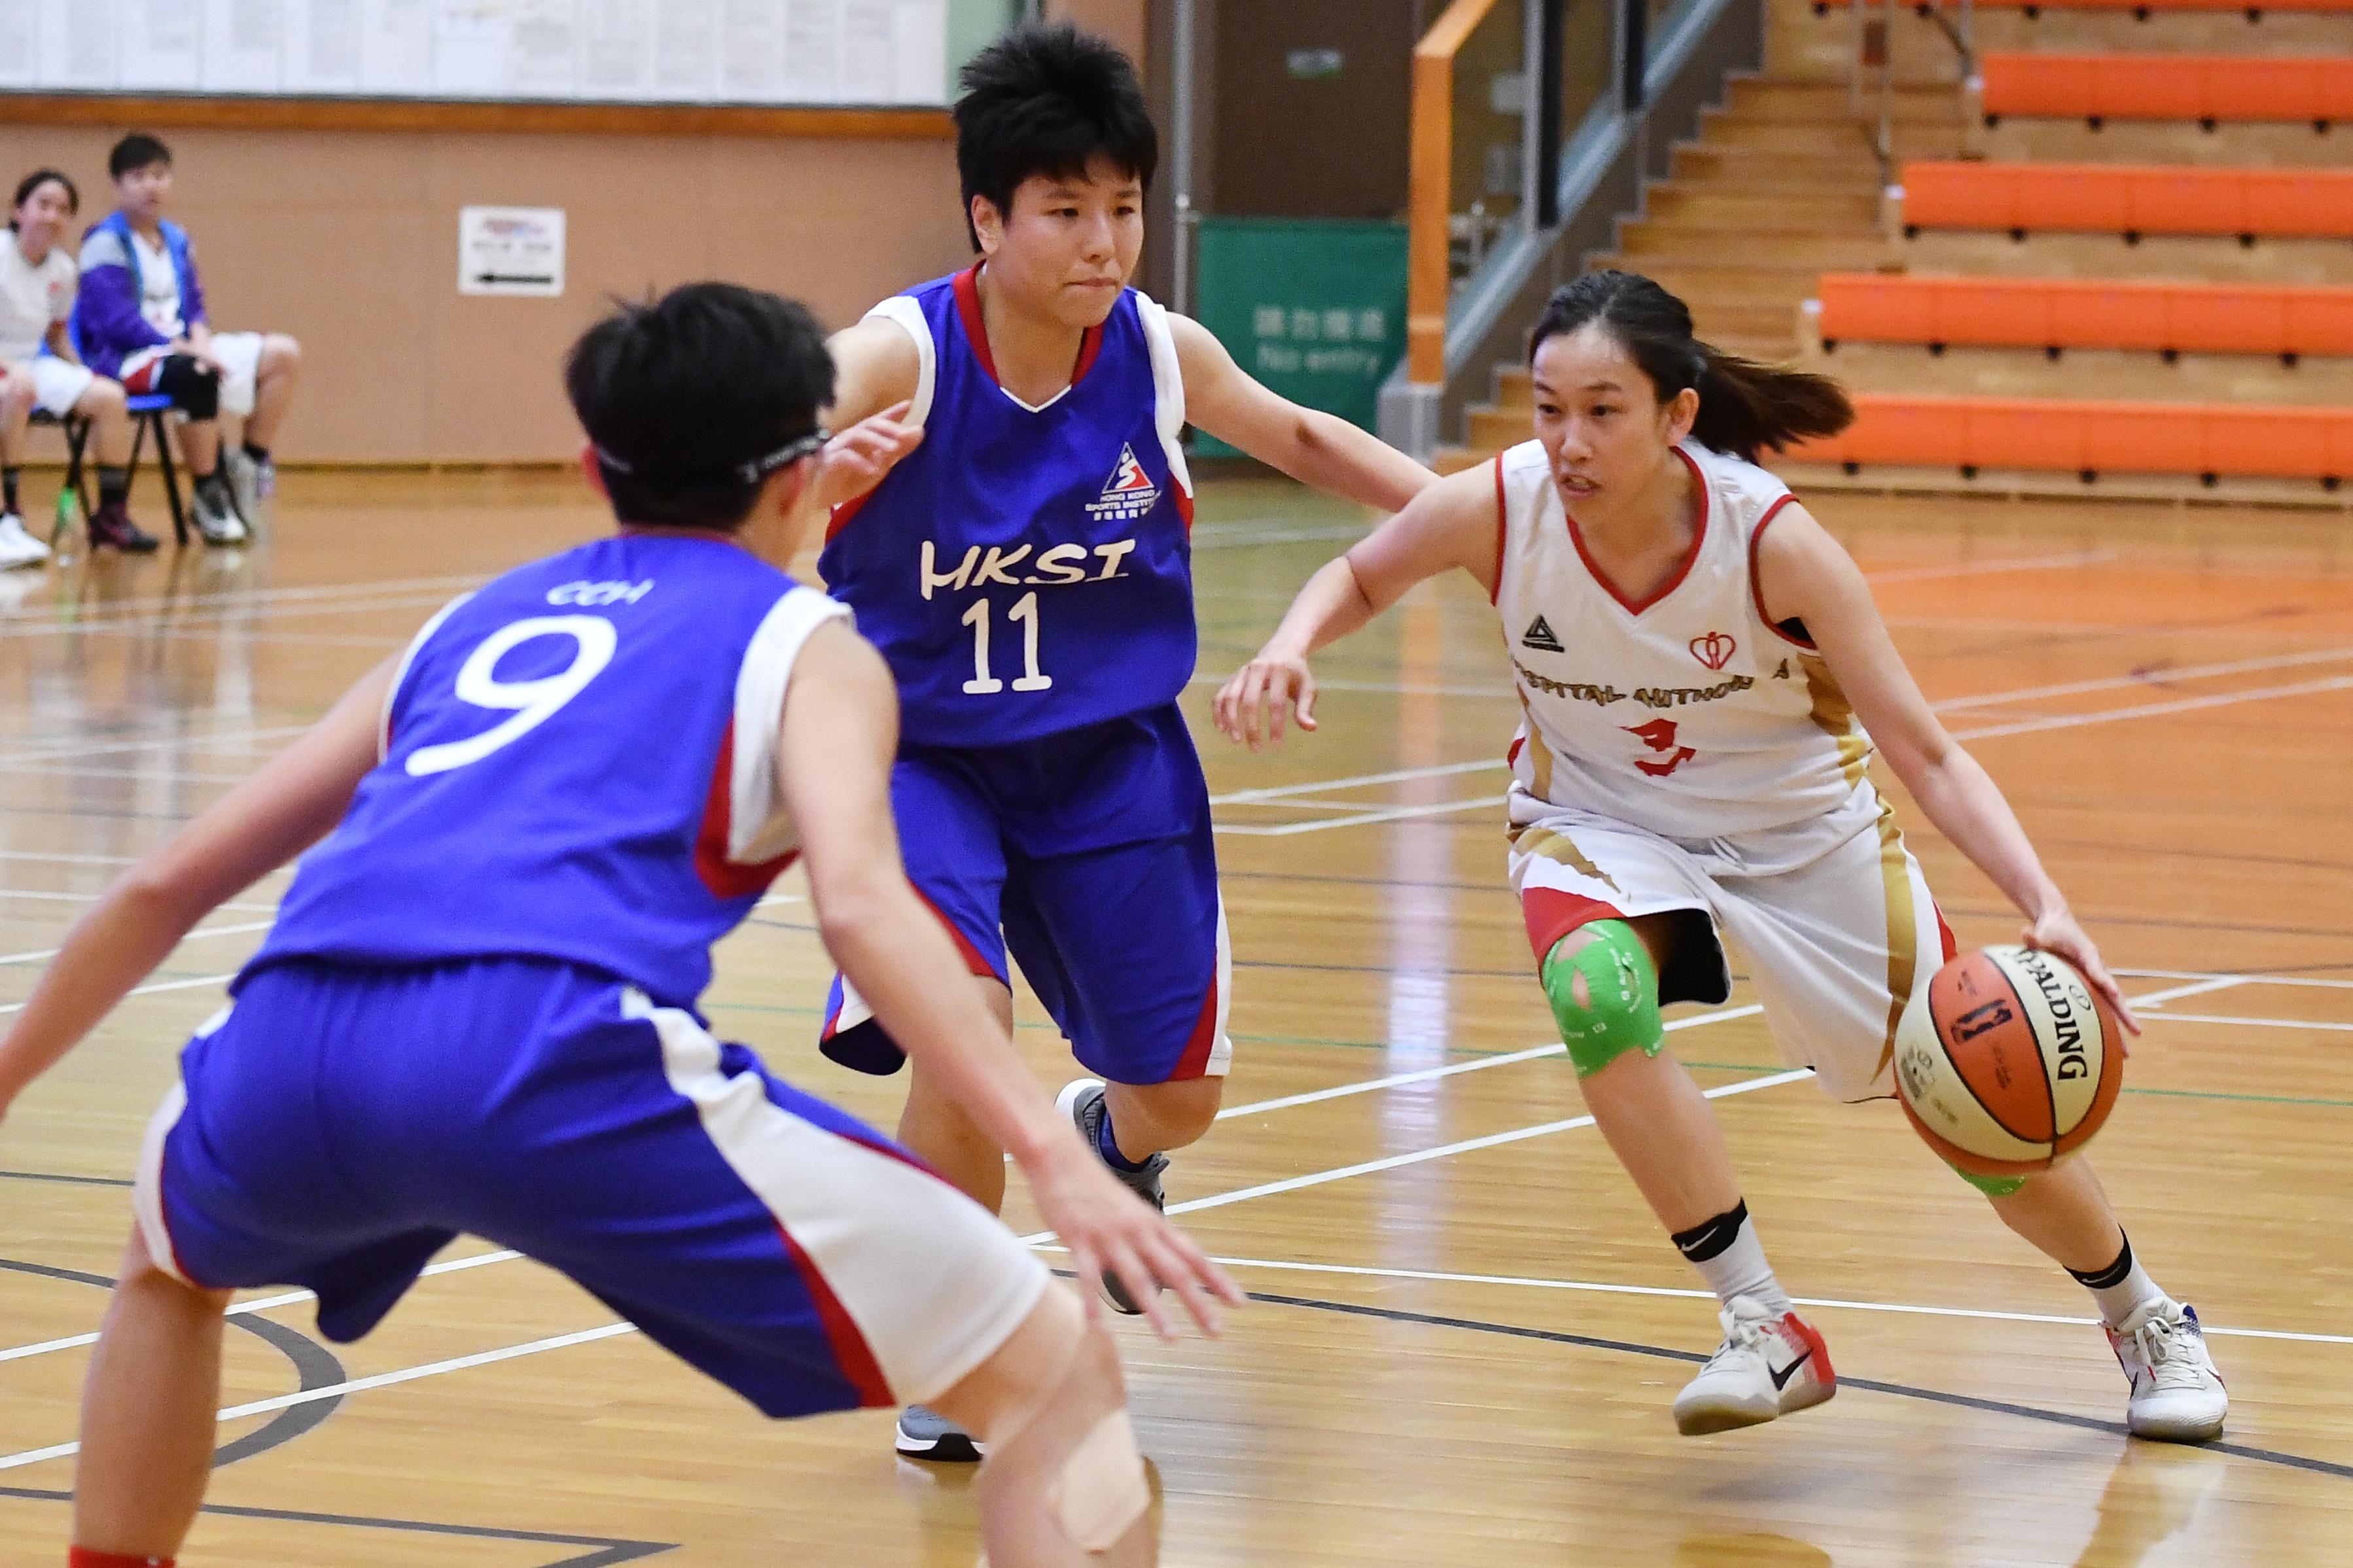 The Corporate Games 2023, organised by the Leisure and Cultural Services Department, will open for enrolment from October 17. Employees of commercial and industrial organisations and the public sector are welcome to take part in the Games. Photo shows athletes participating in a basketball competition at the Corporate Games 2018.